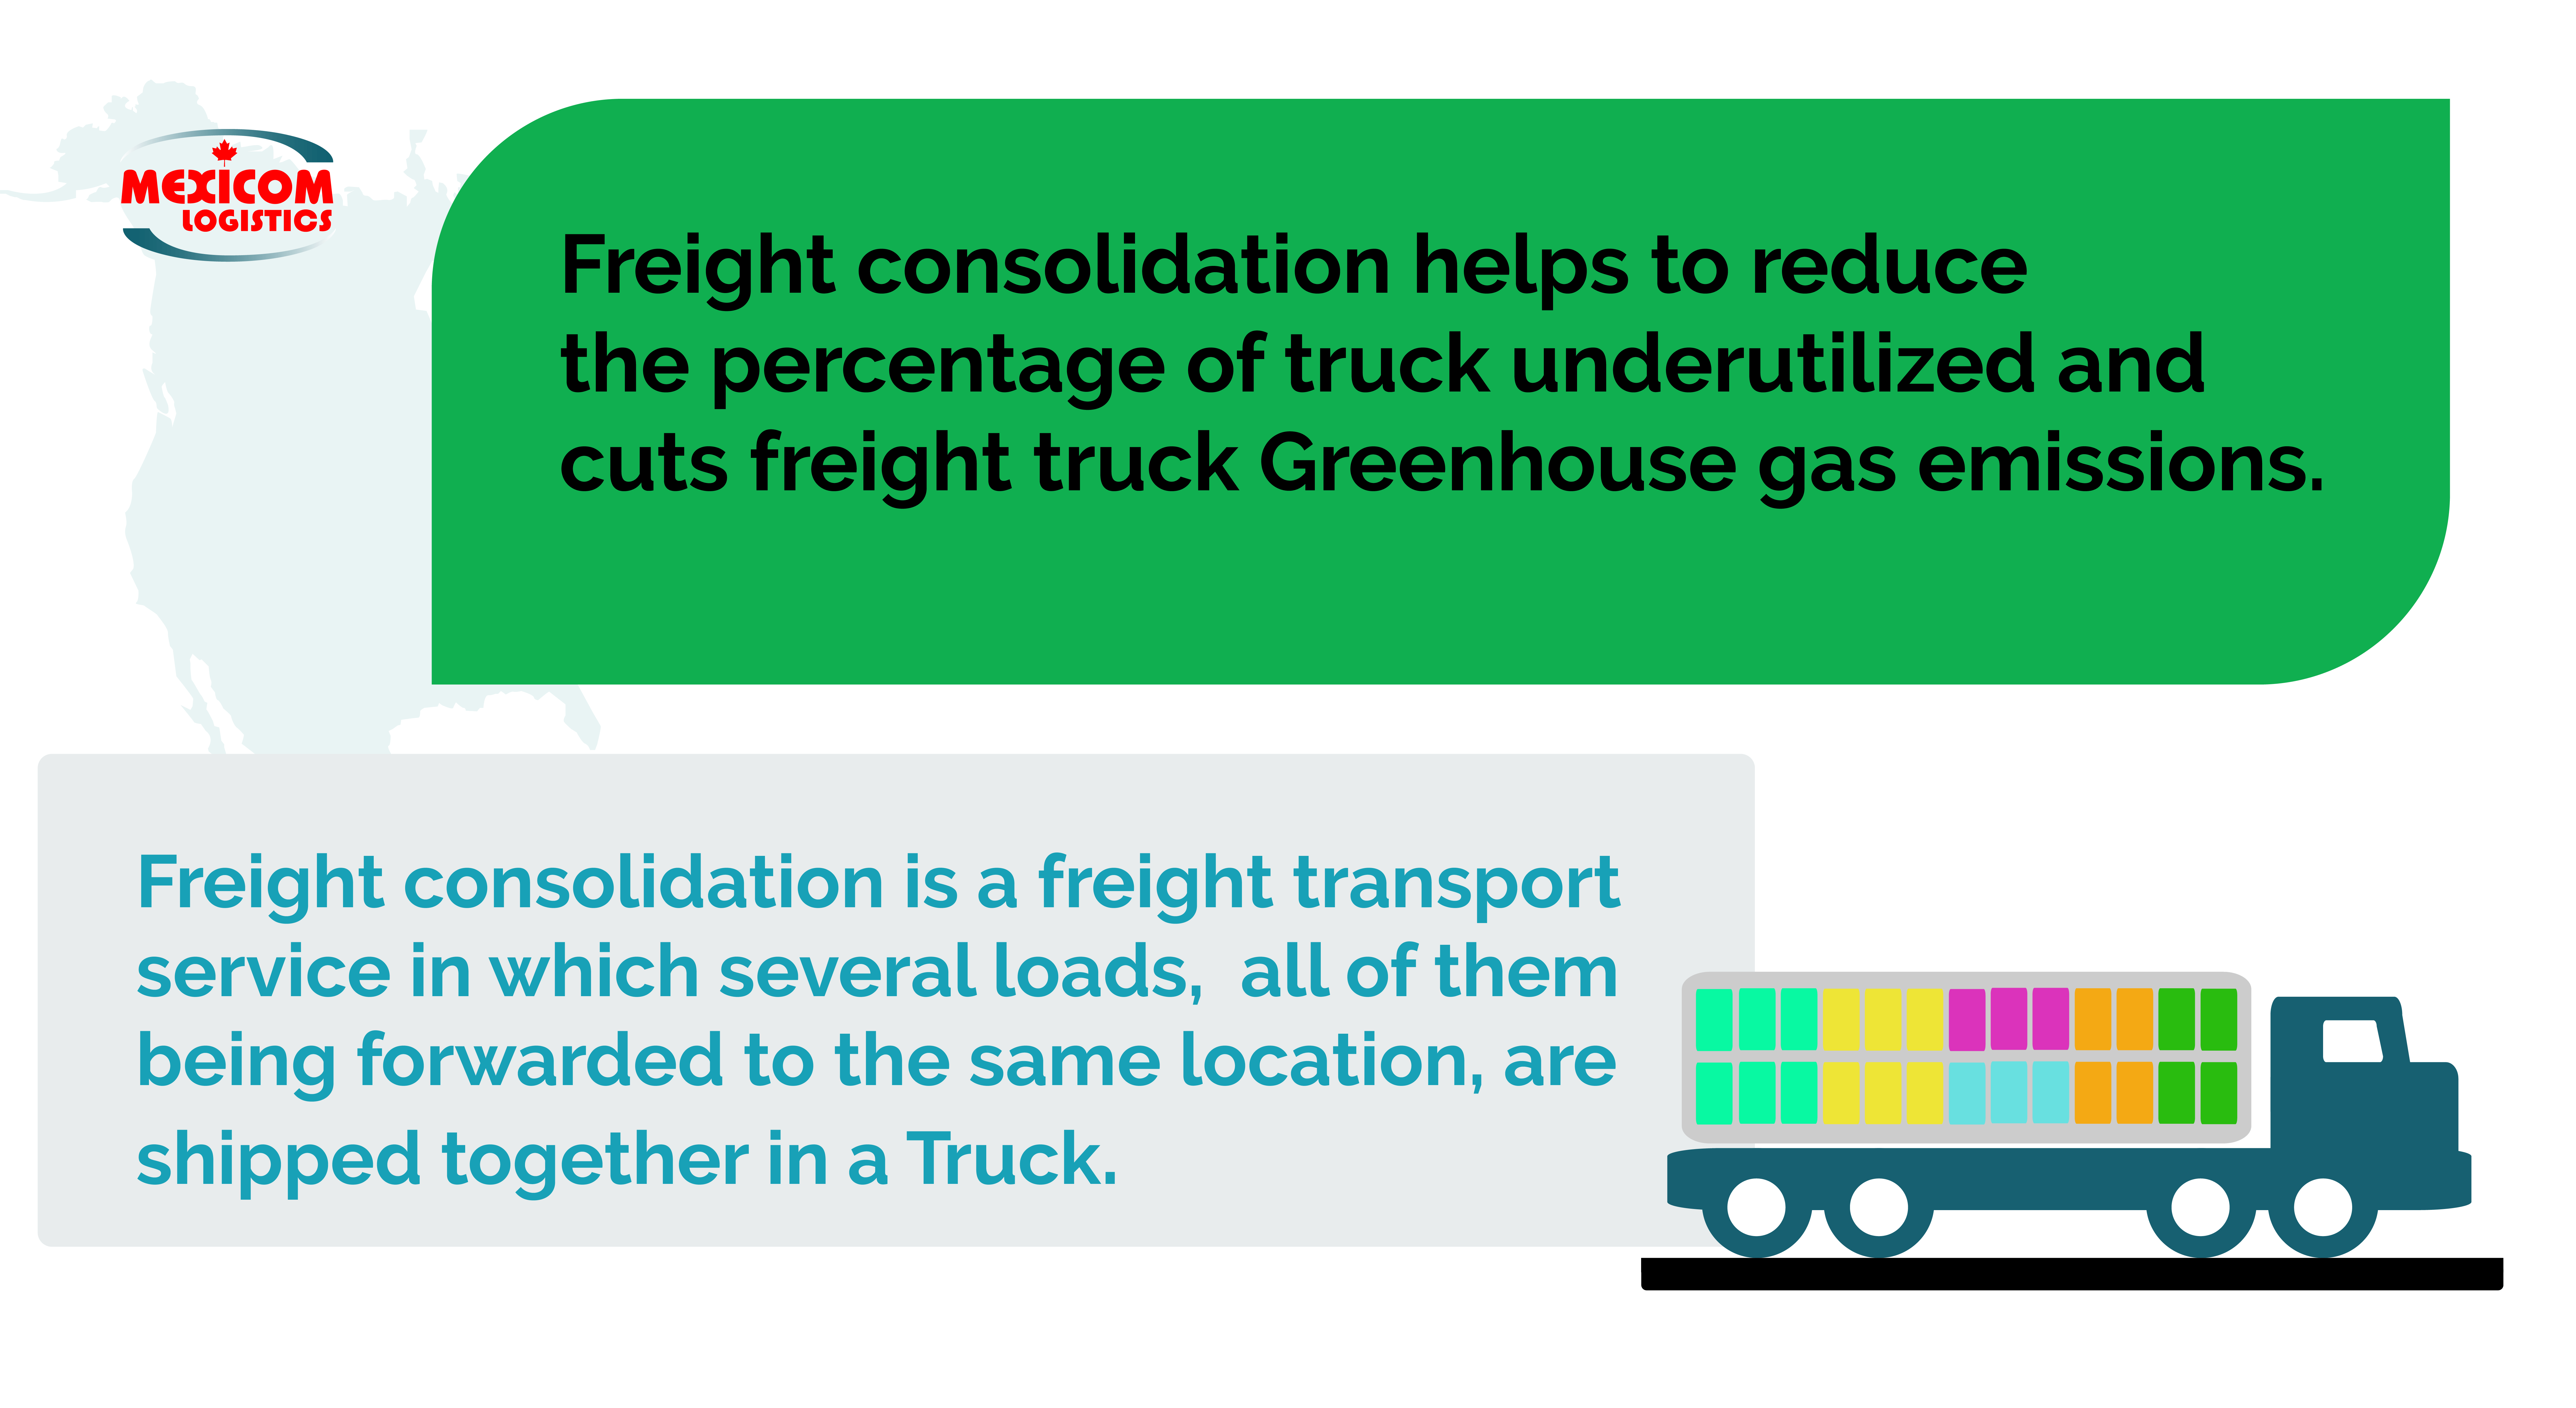 Freight consolidation to reduce CO2 emissions that cause climate change